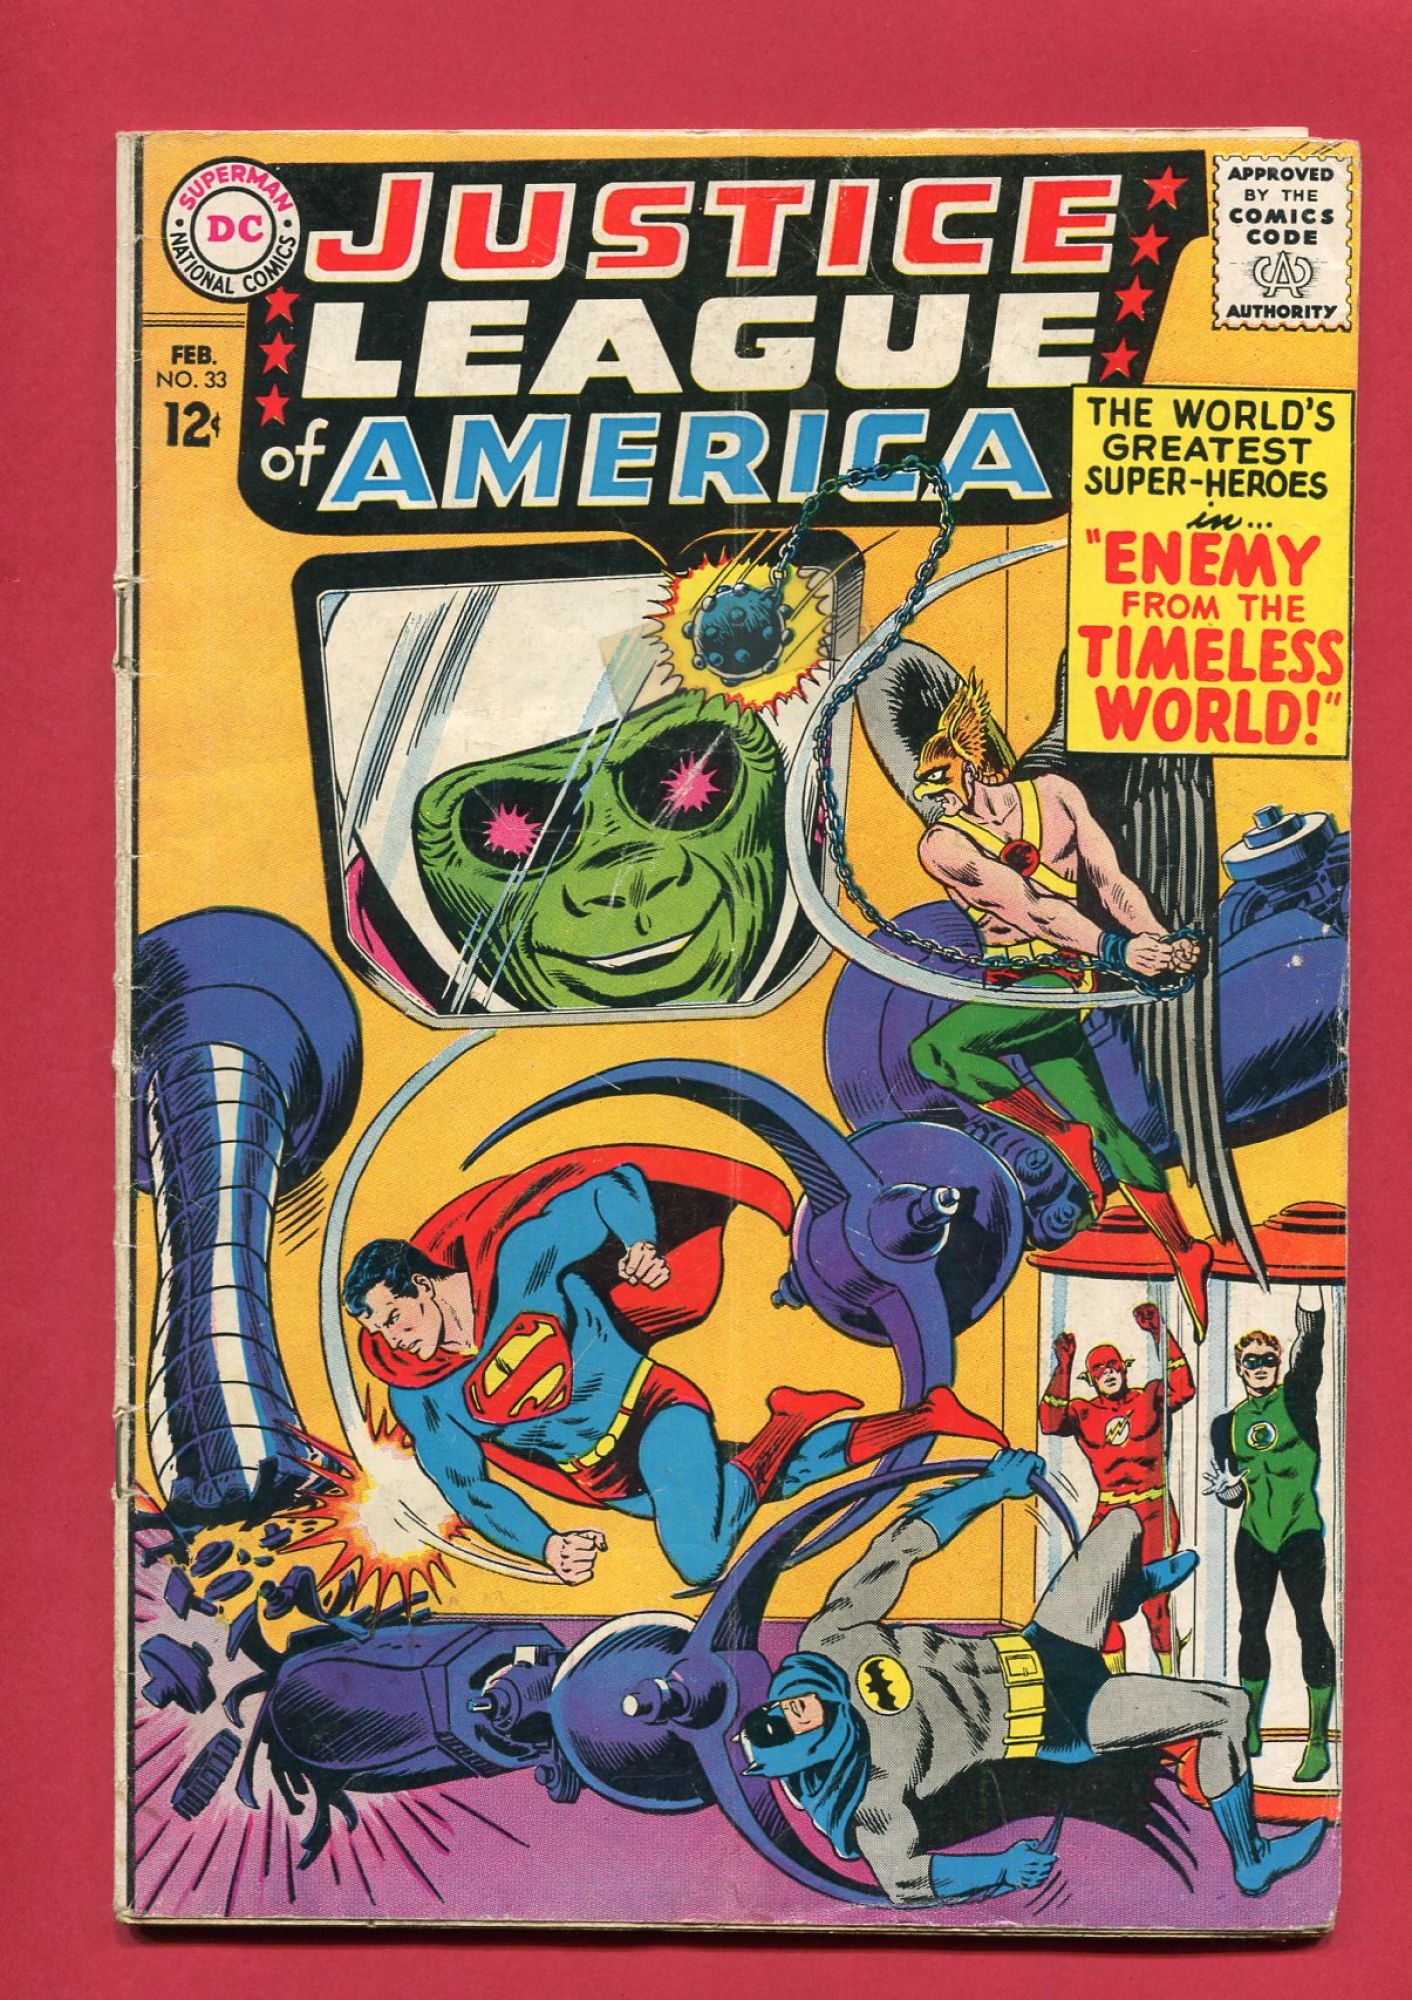 Justice League of America #33, Feb 1965, 3.0 GD/VG